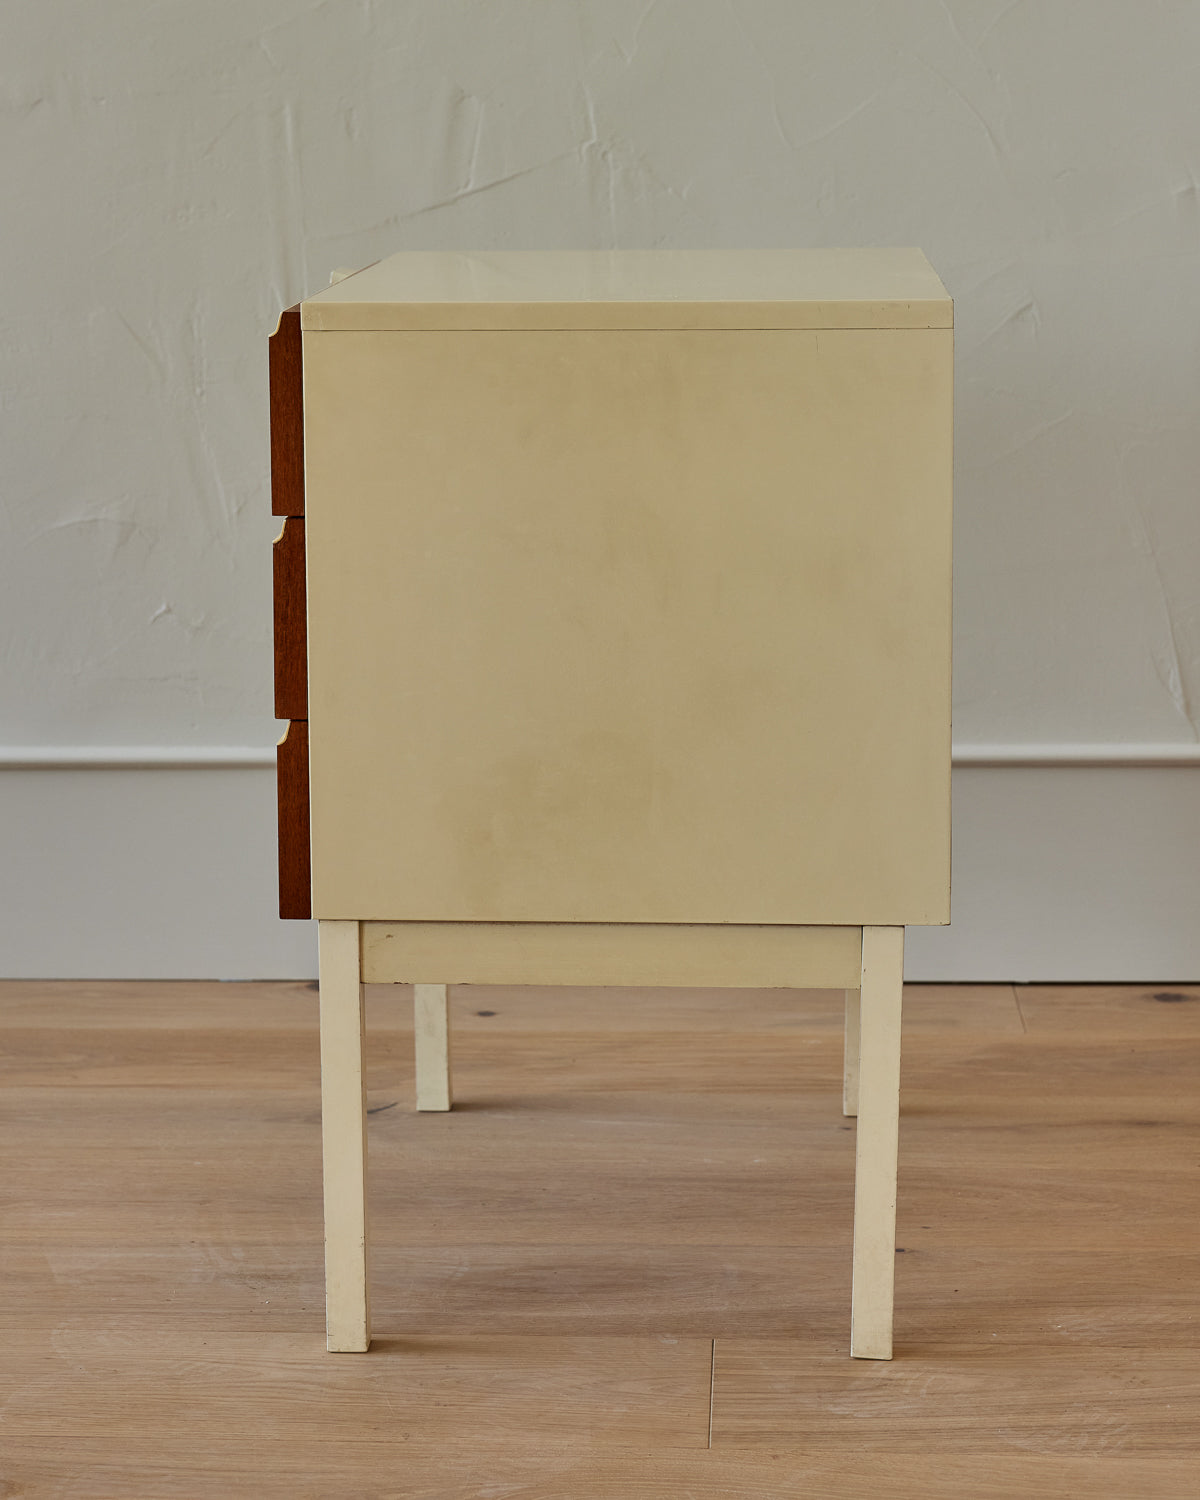 Mid-Century Modern End Tables